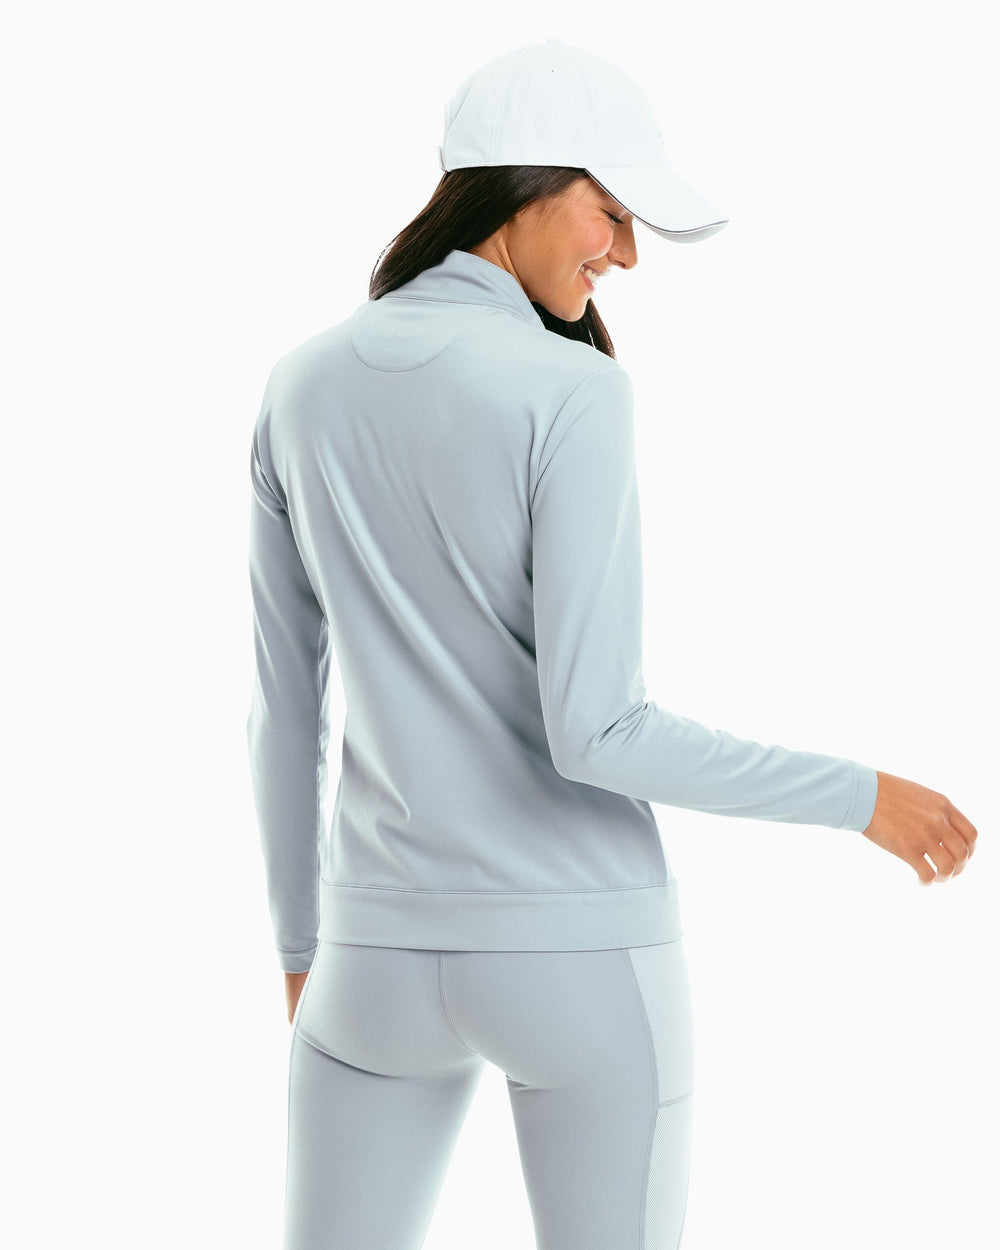 The back of the Women's Josette Mixed Media Full Zip Athletic Jacket by Southern Tide - Light Grey